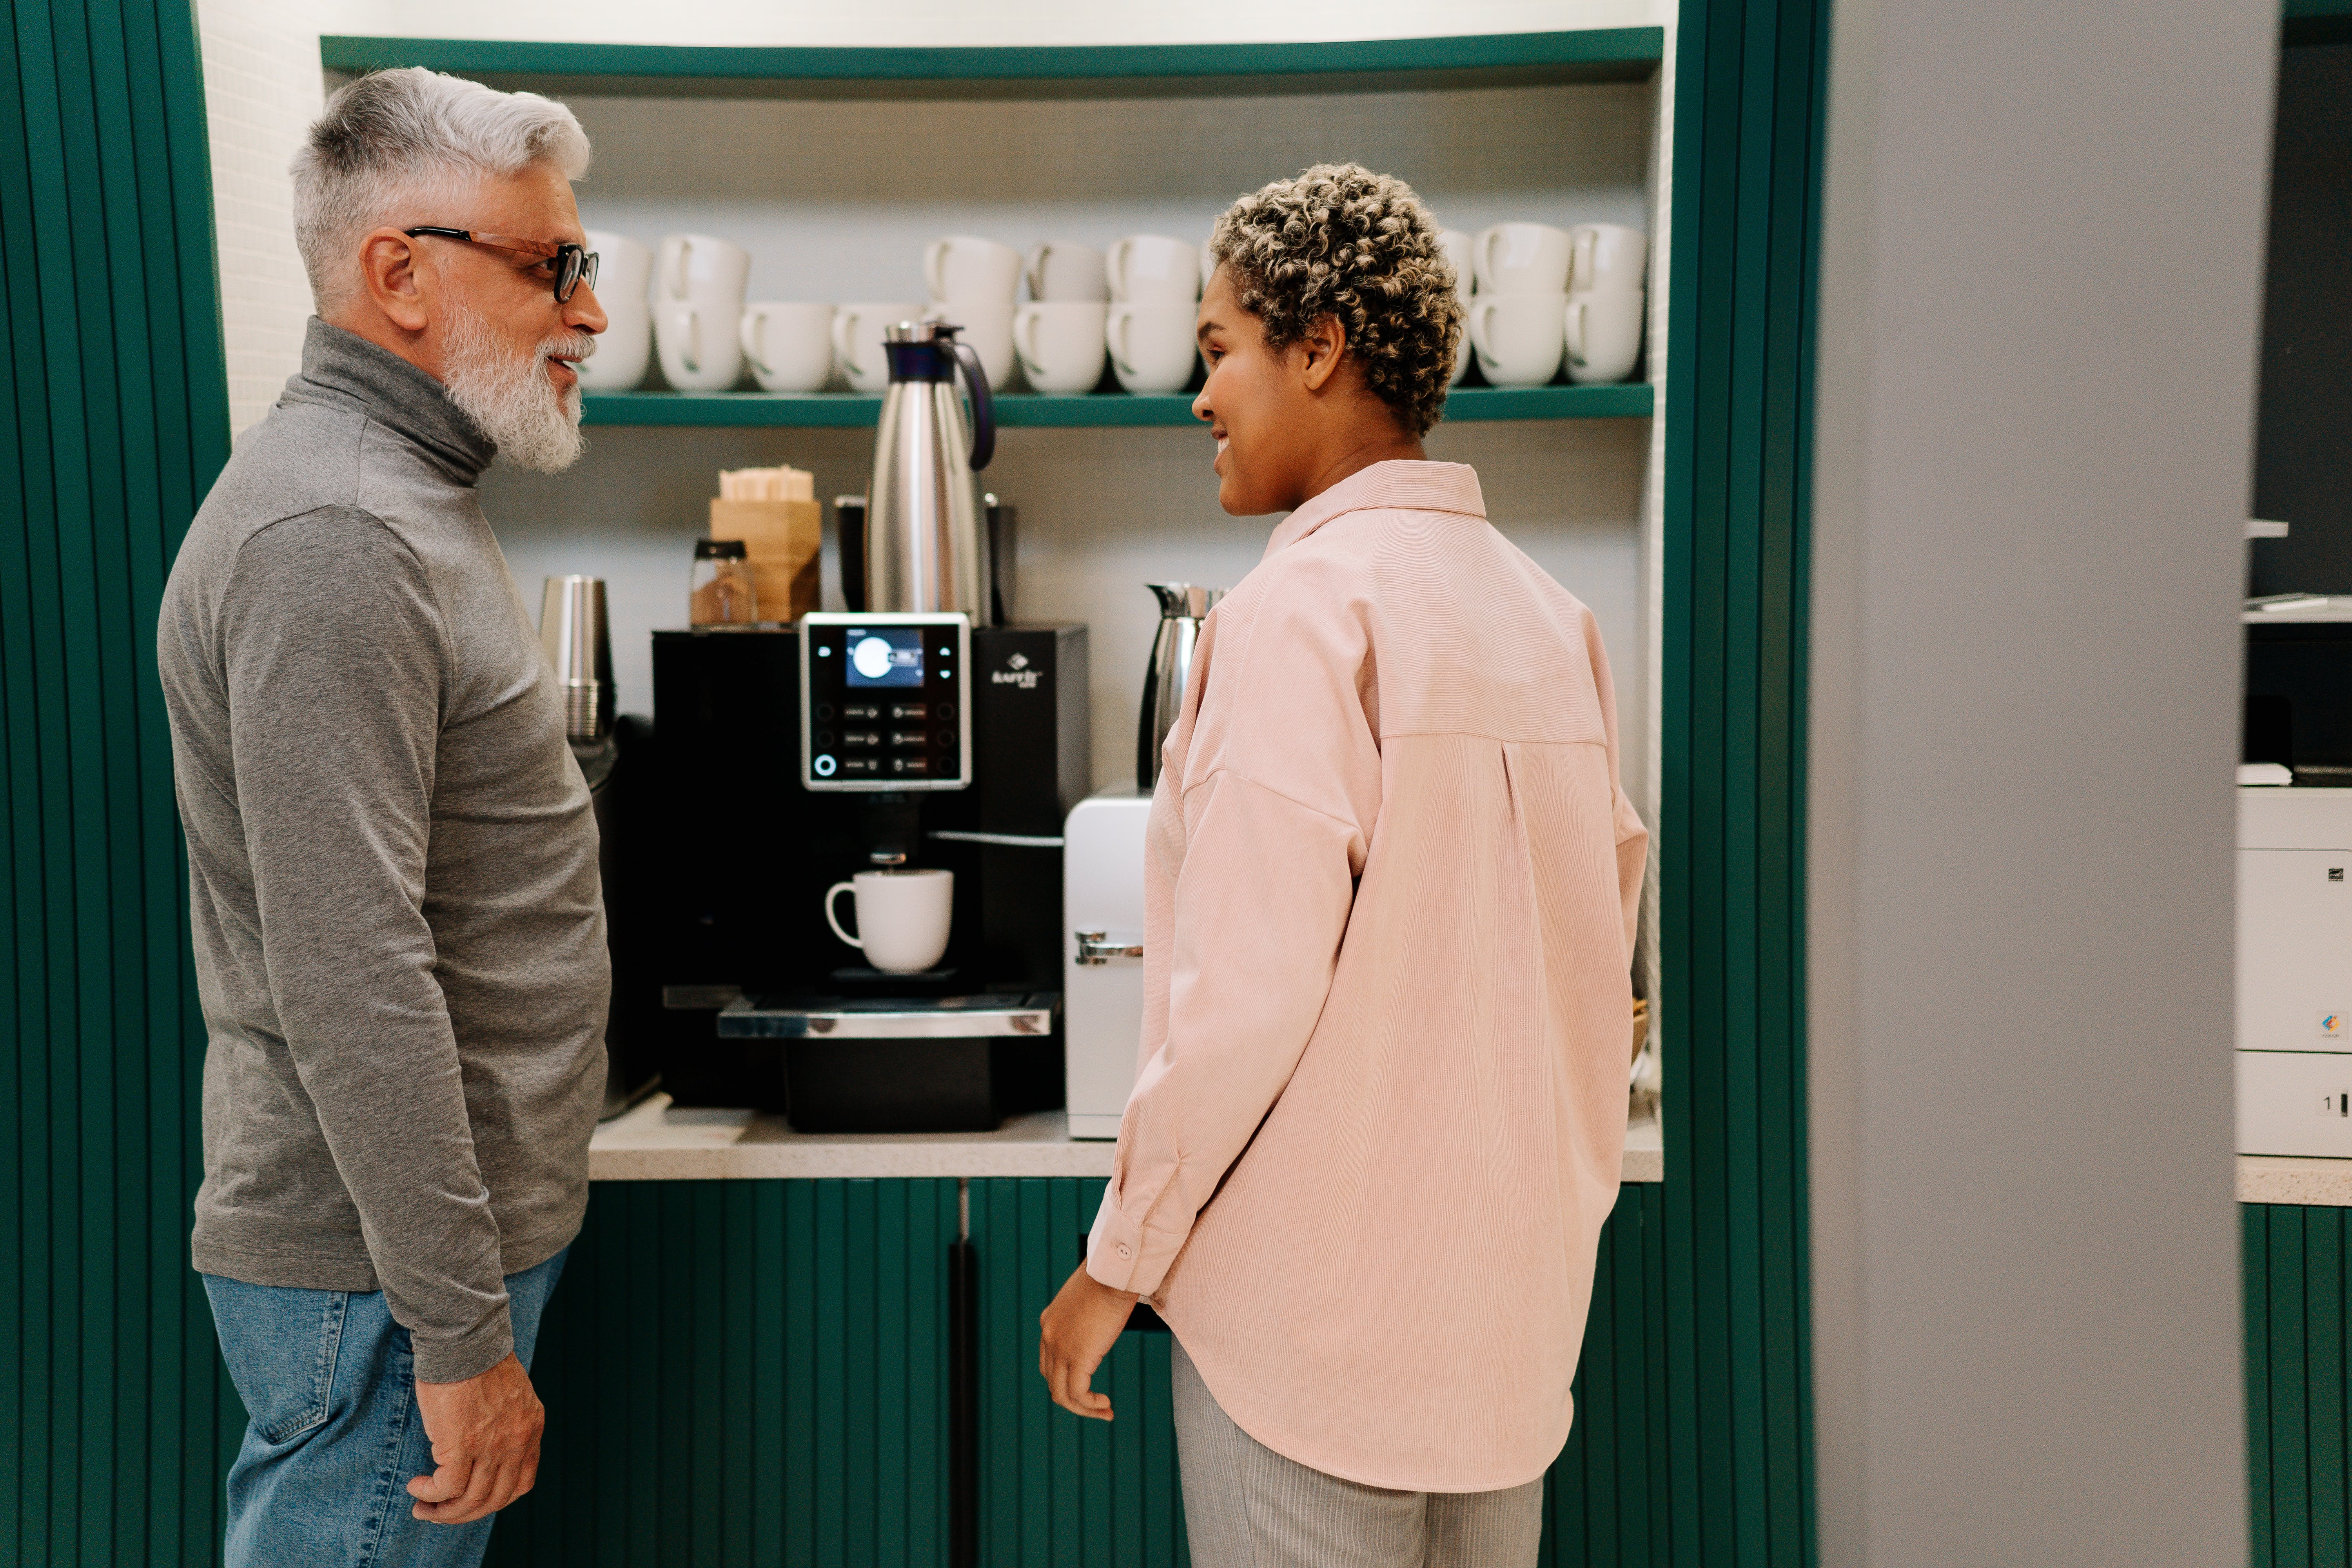 An older man talking to a younger woman while standing in front of a coffee machine | Source: Pexels